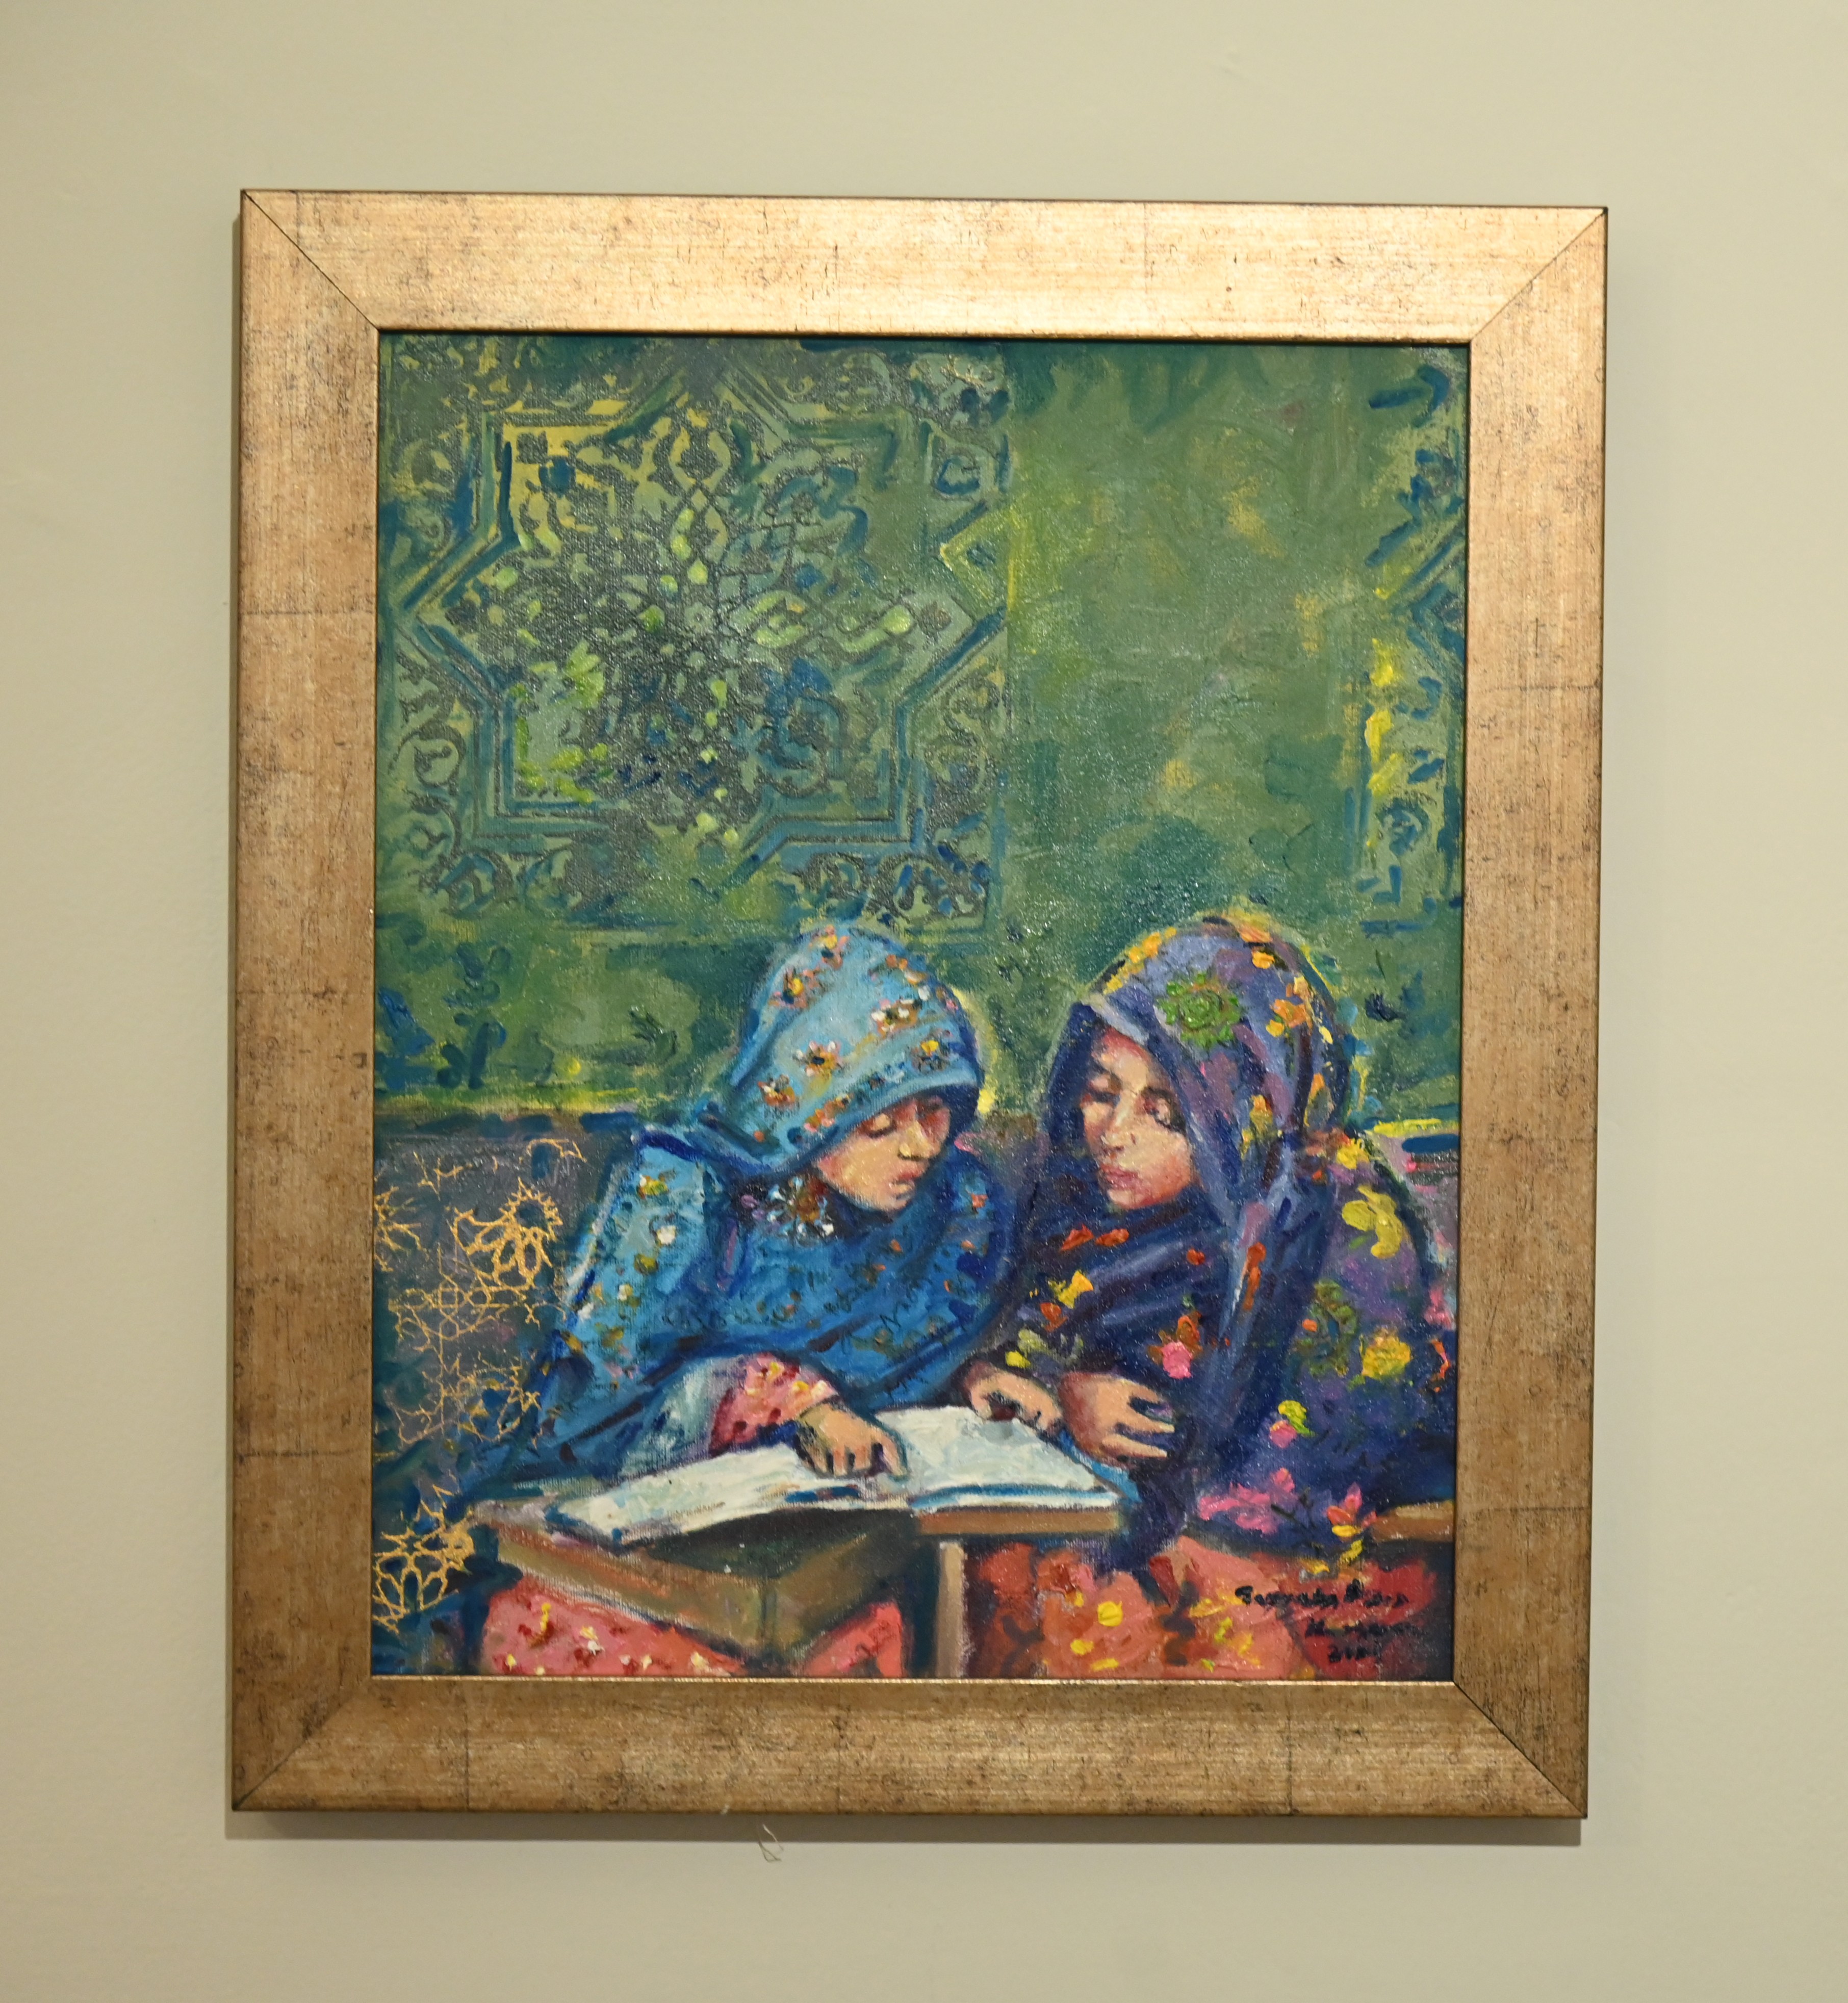 The painting of two girls reading book